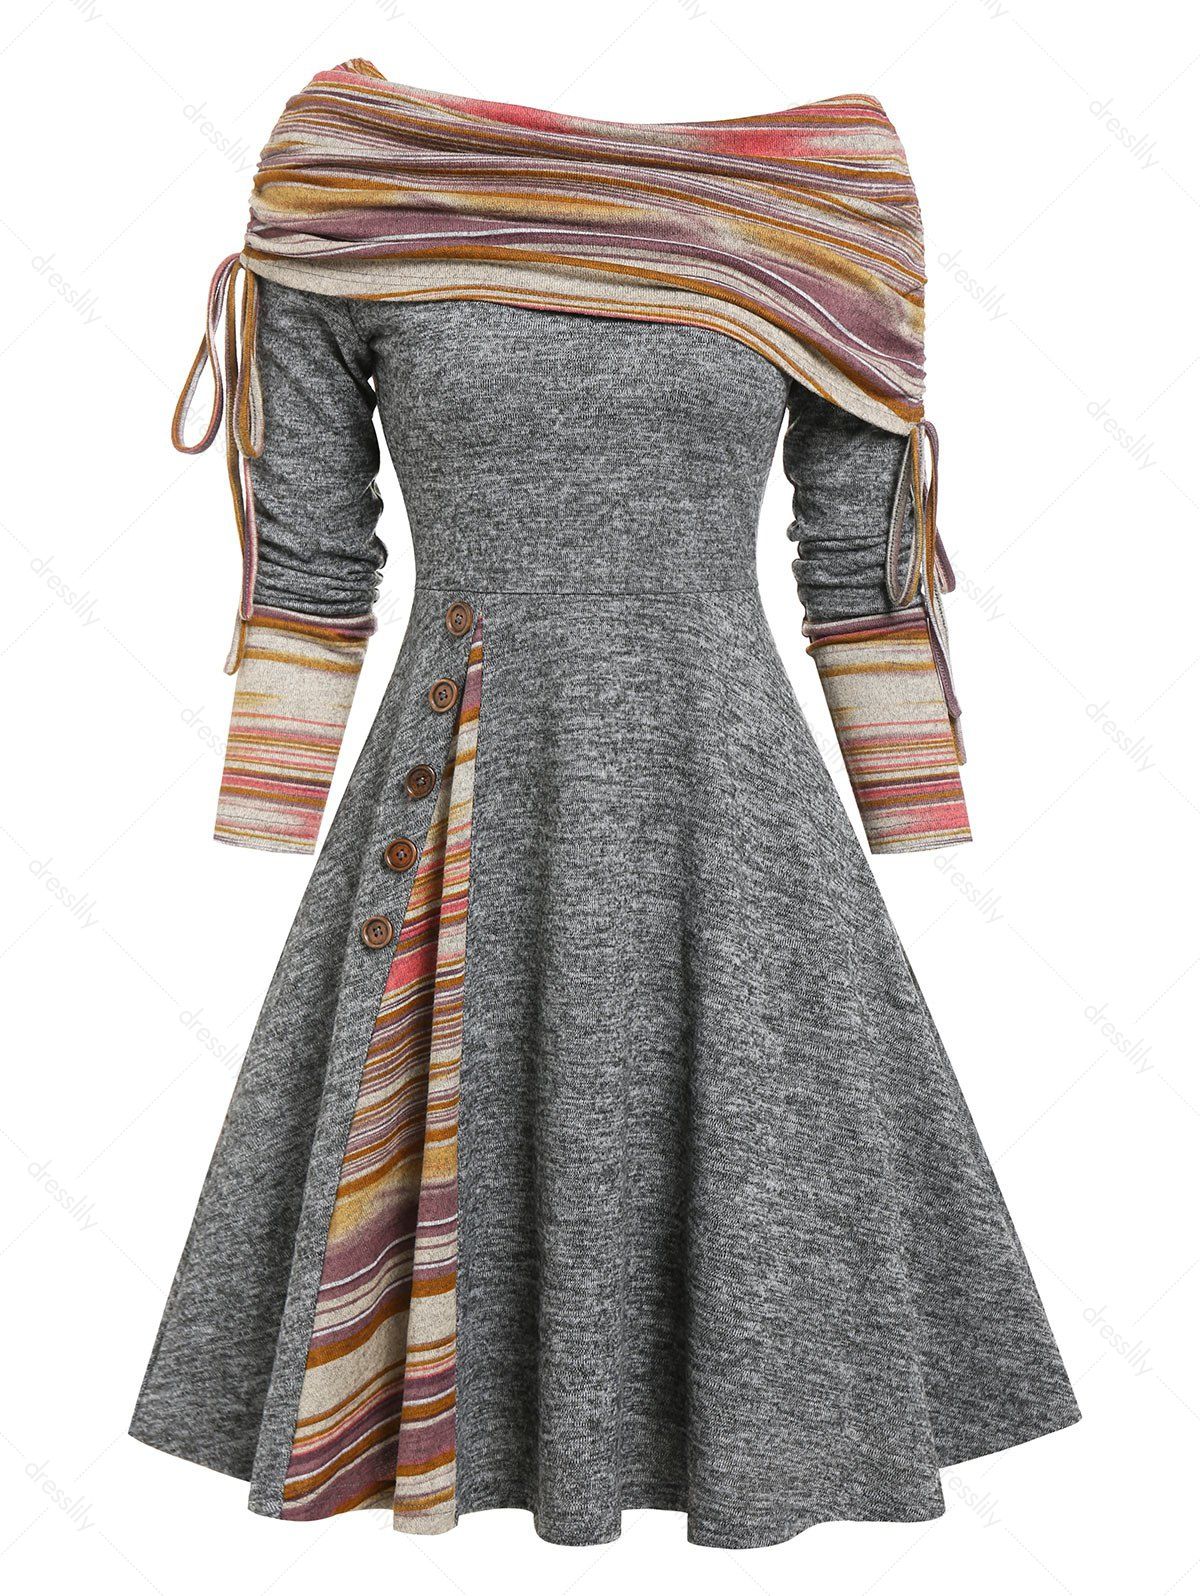 Convertible Neck Cinched Striped Flare Dress - LIGHT GRAY L